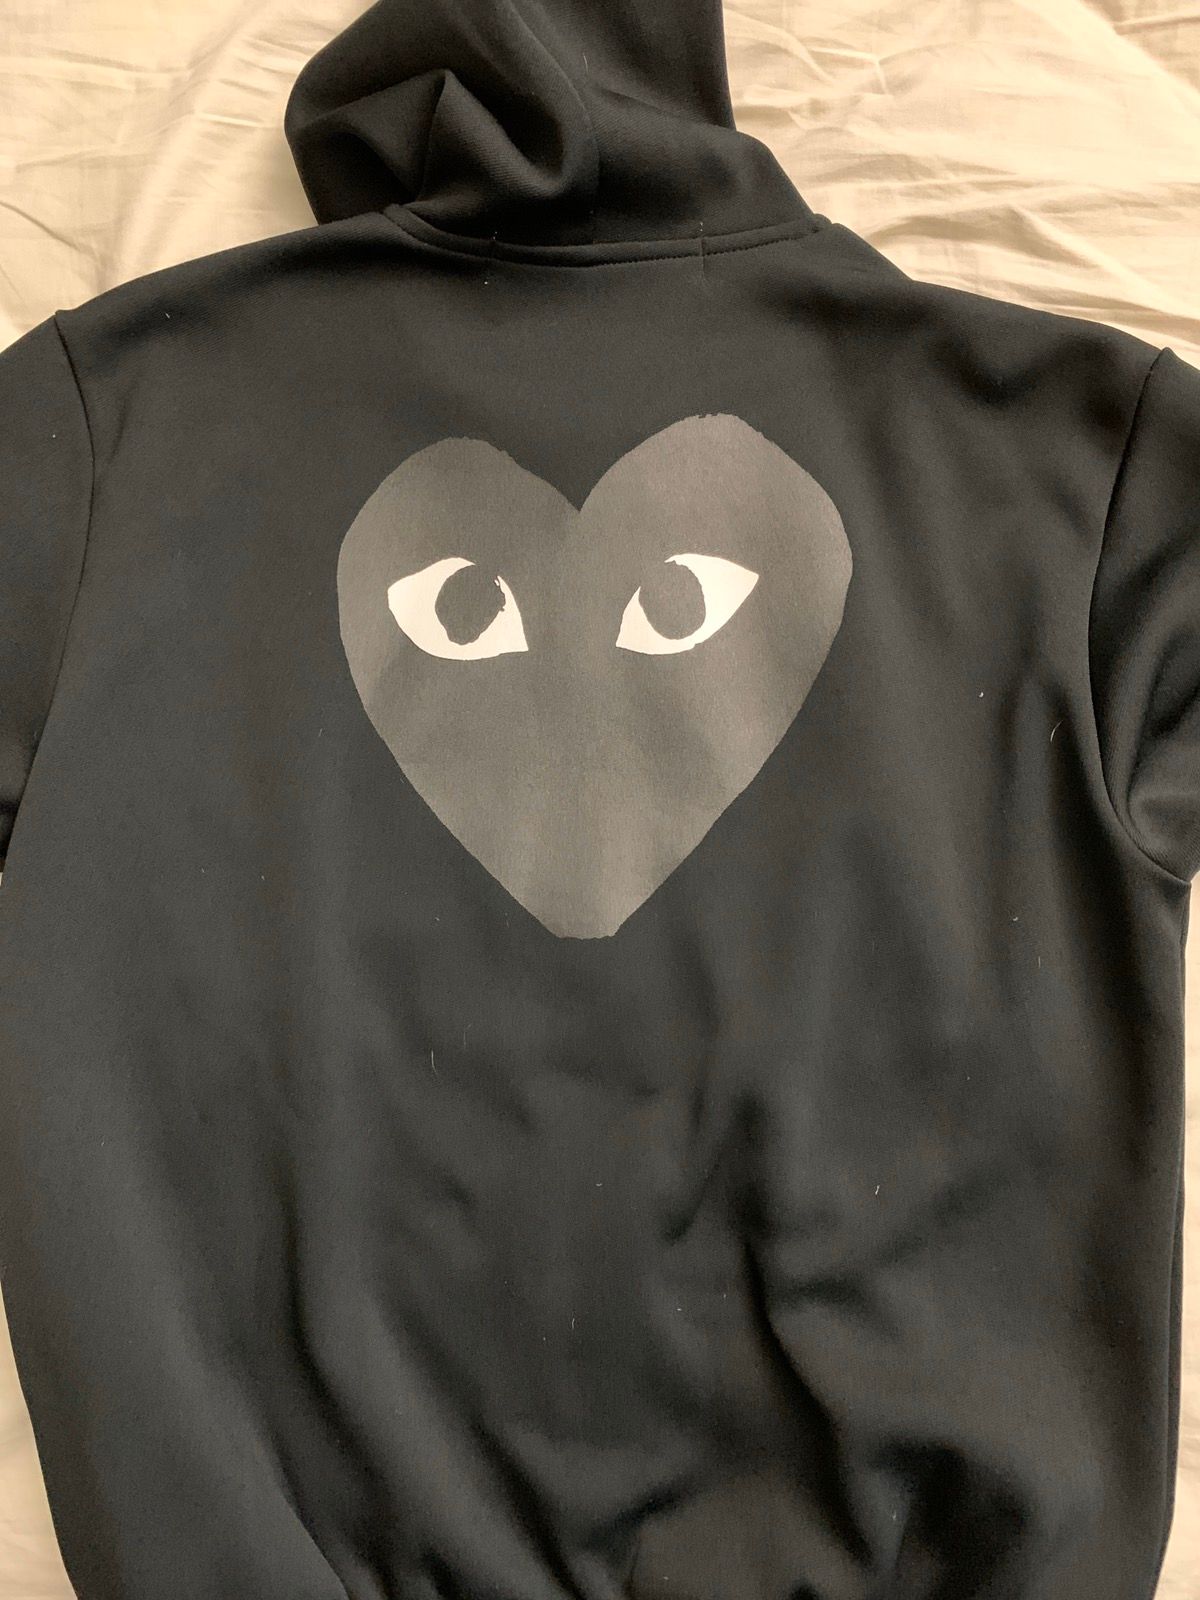 Comme Des Garcons Play CDG Play Black Heart Black Zip Up Hoodie Size US S / EU 44-46 / 1 - 4 Preview